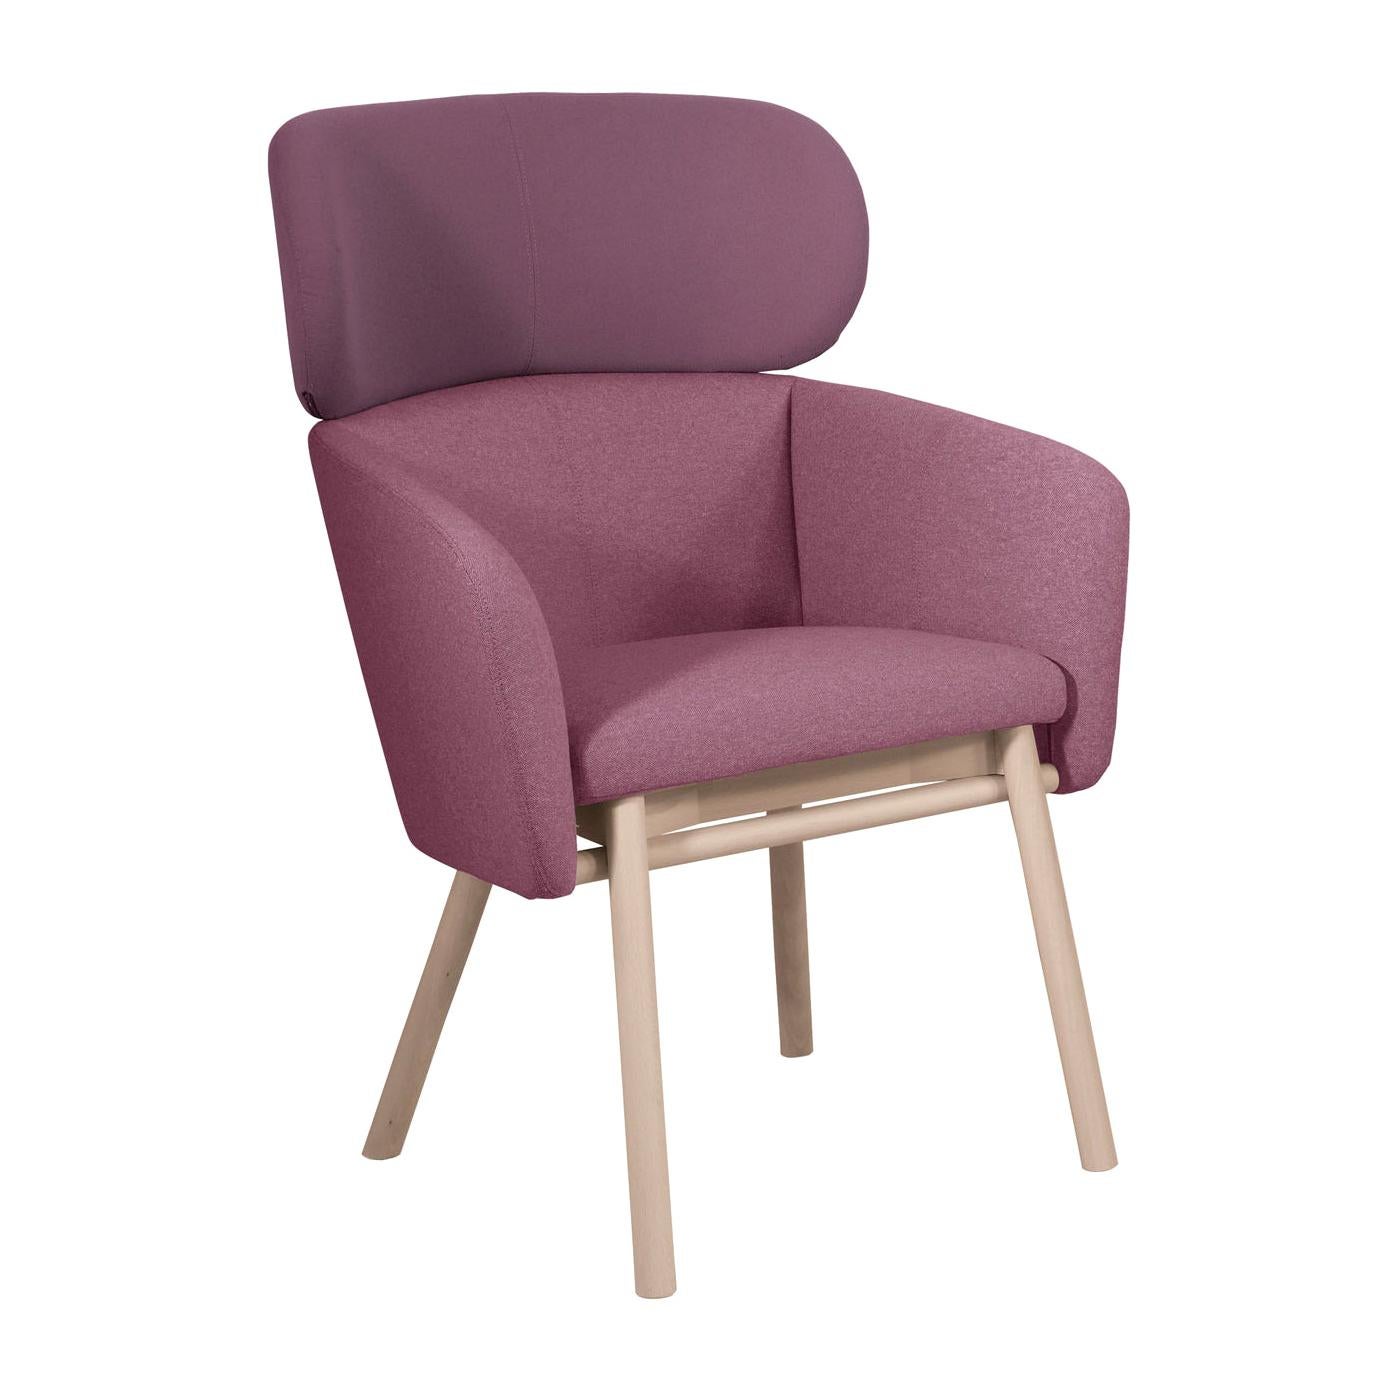 Balù Extra Large Lilac and White Chair by Emilio Nanni For Sale